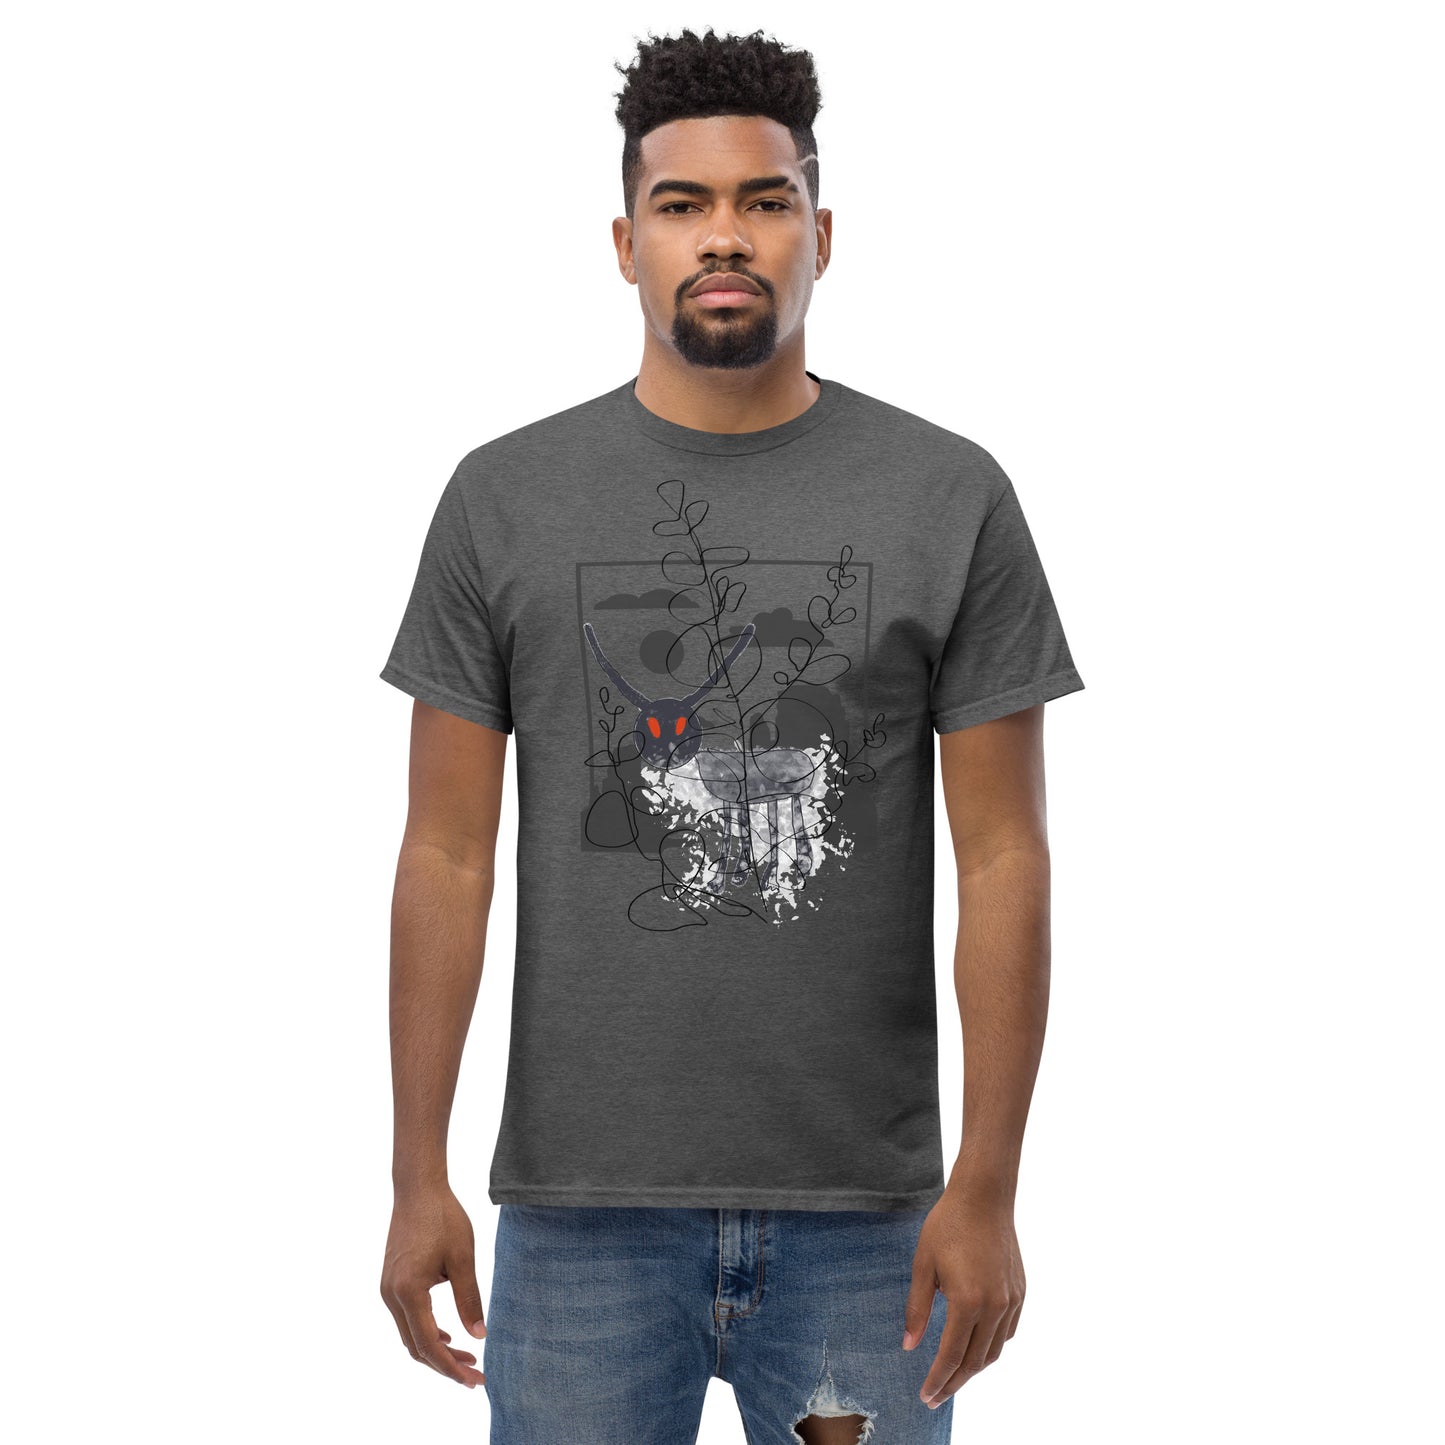 Premium 100% Cotton Men's Classic Tee for Effortless Style